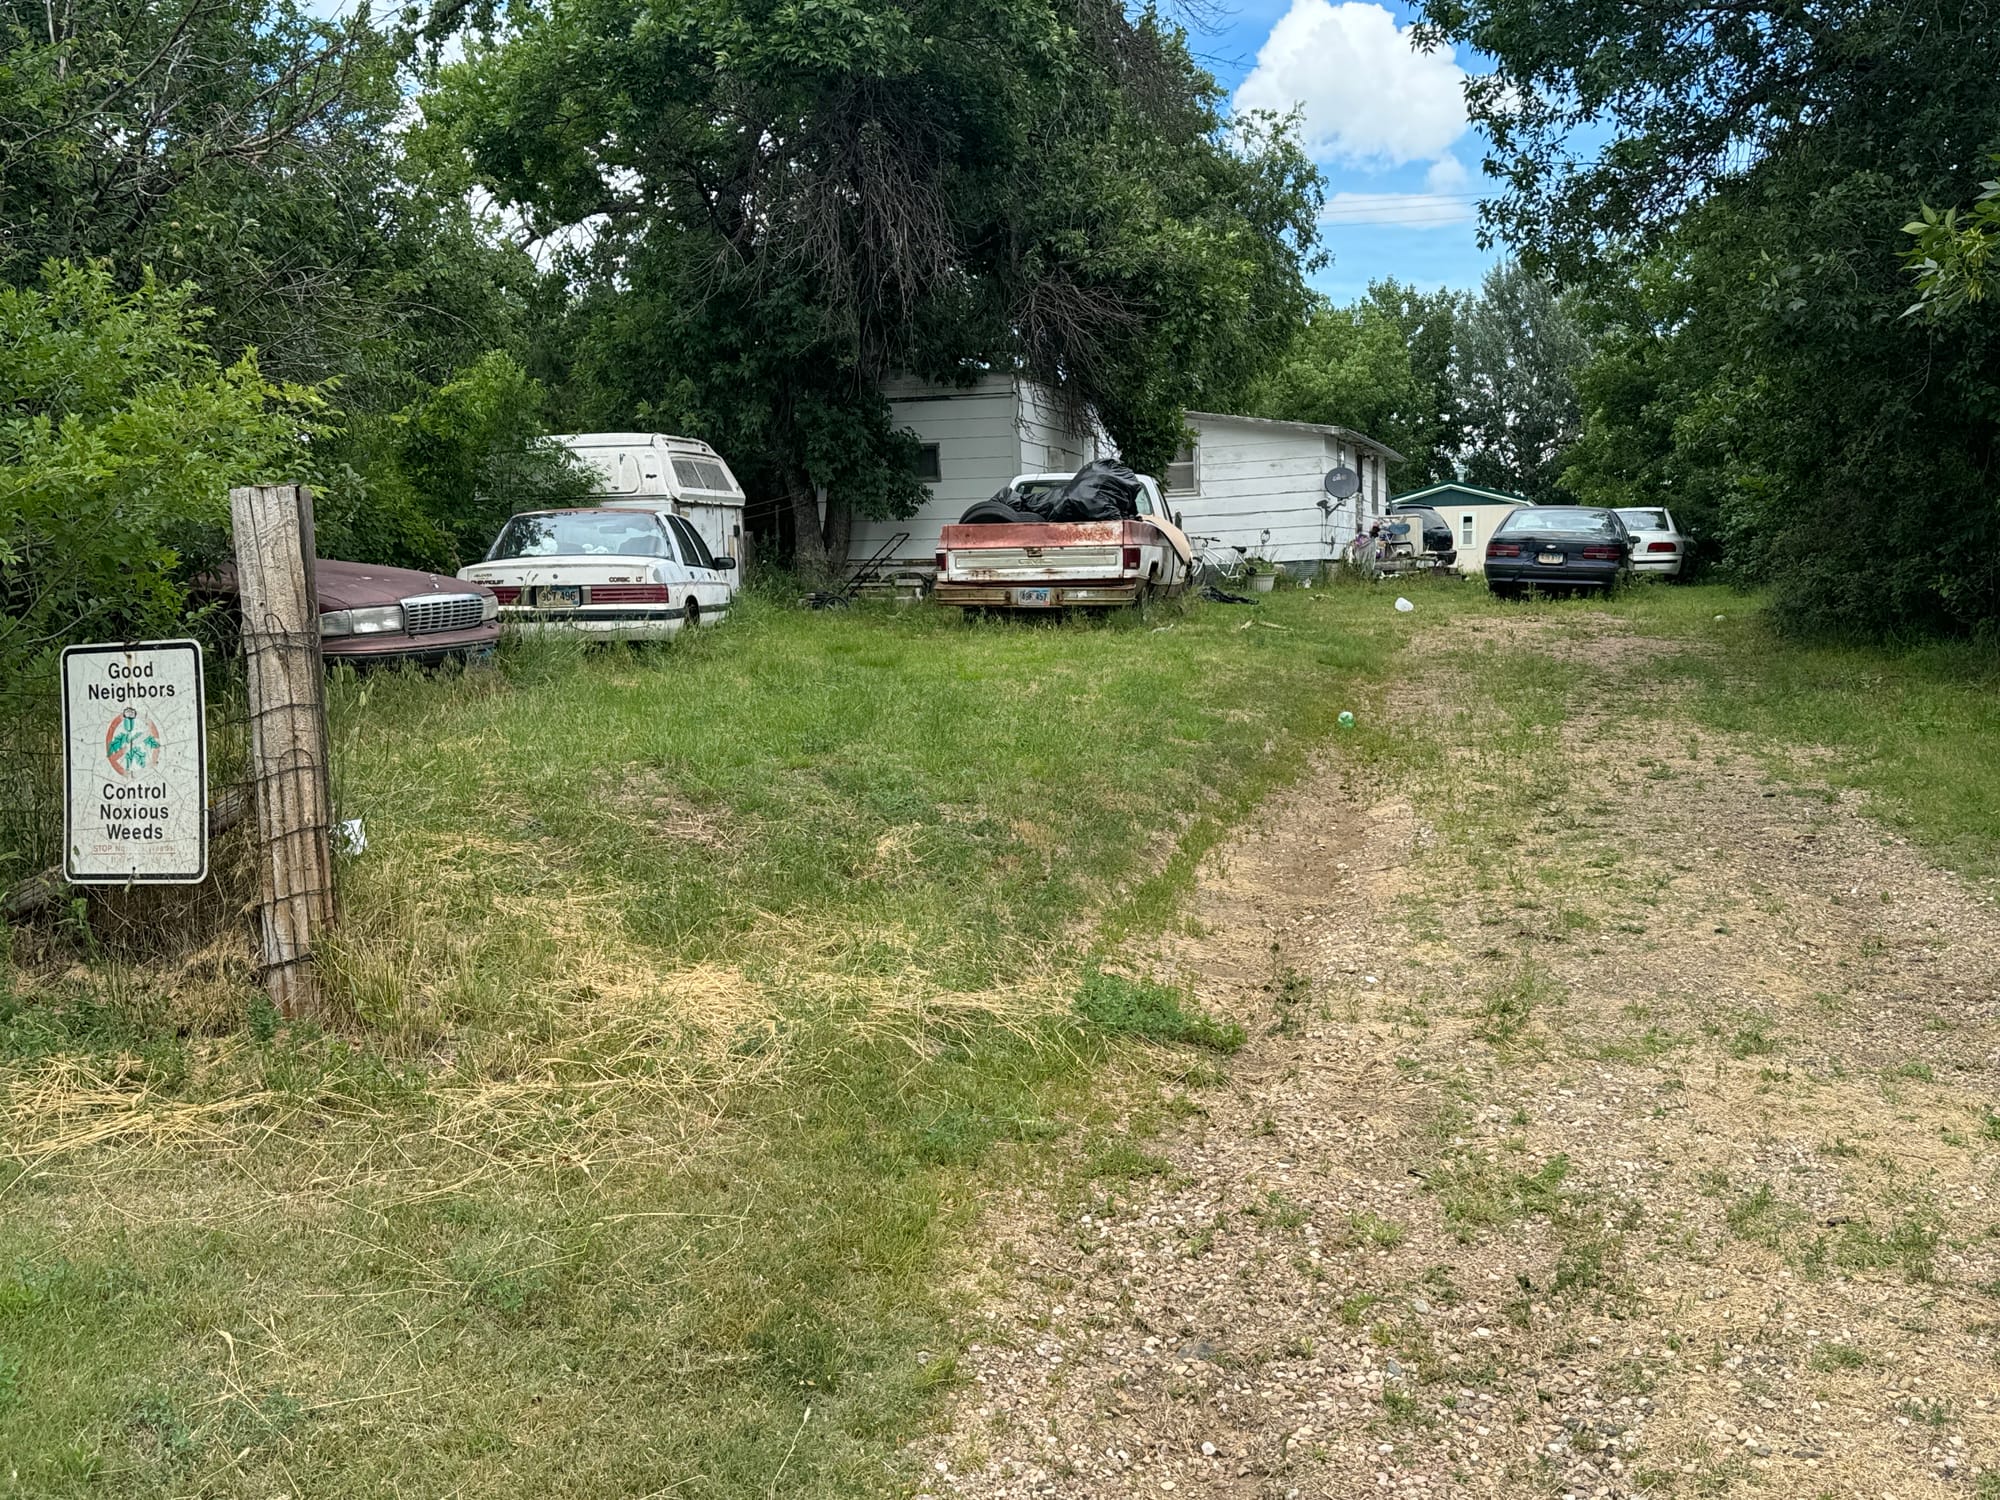 Old vehicles sit in a property in Faith, South Dakota.